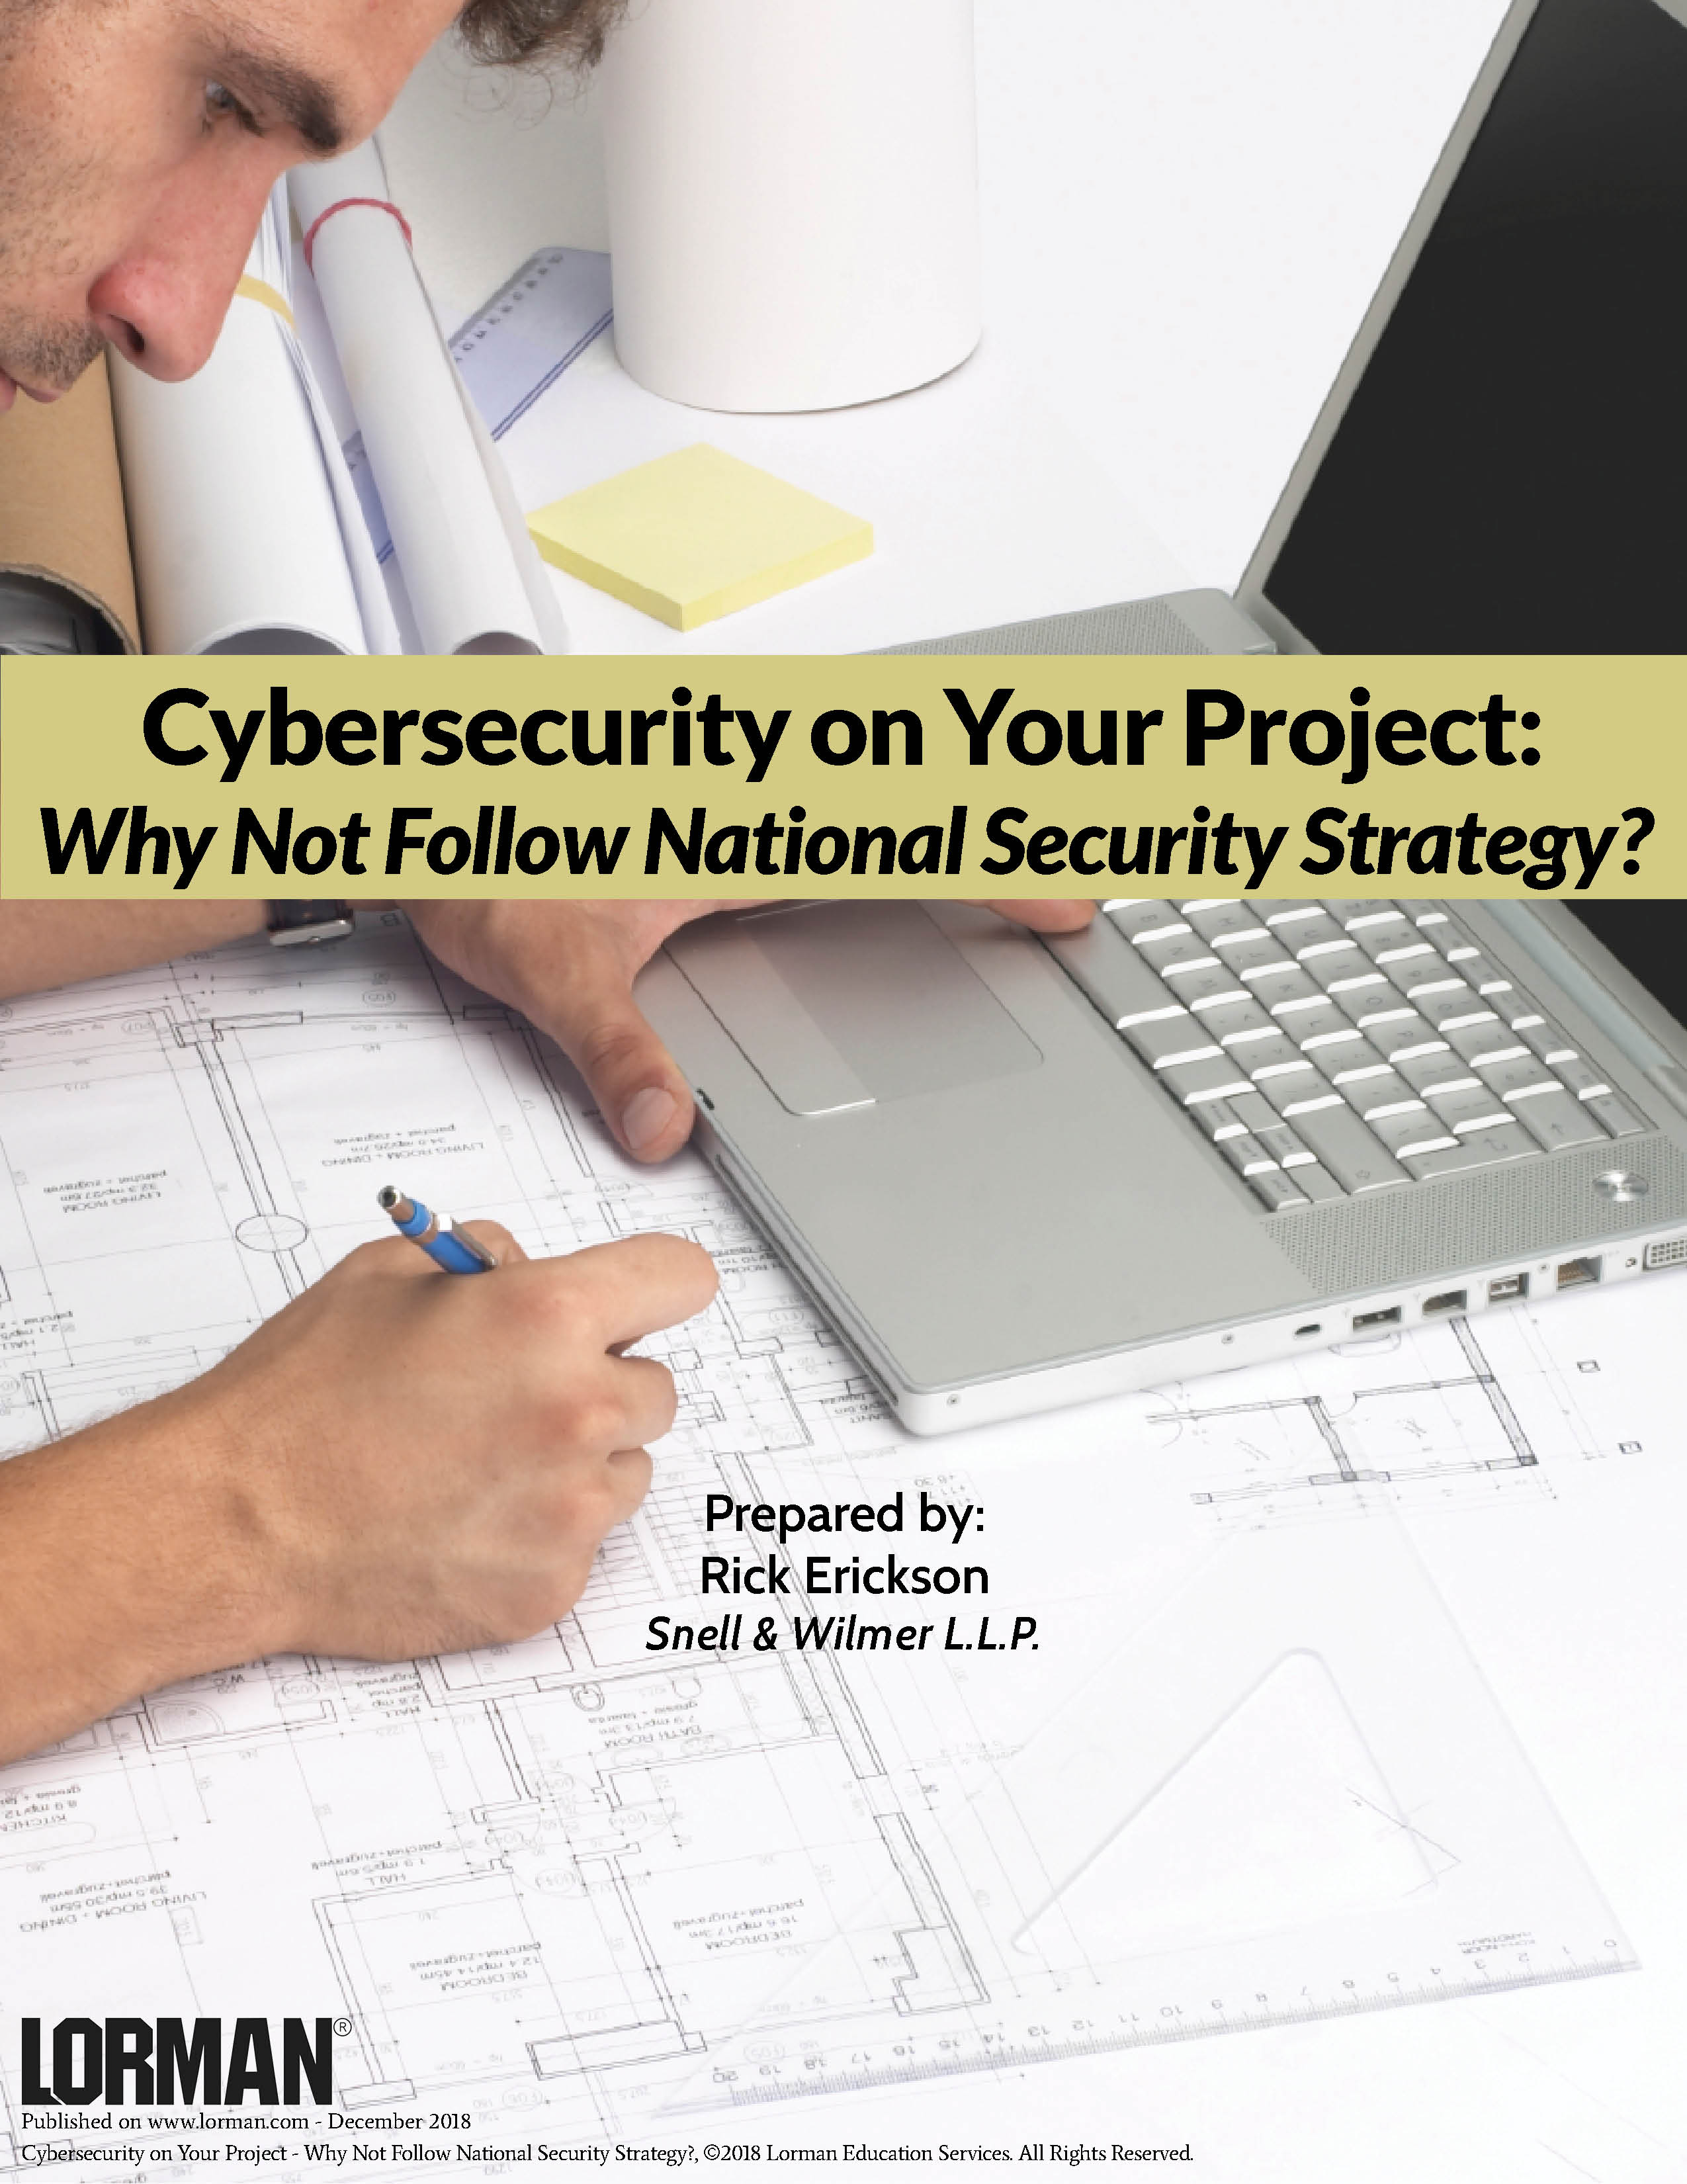 Cybersecurity on Your Project: Why Not Follow National Security Strategy?